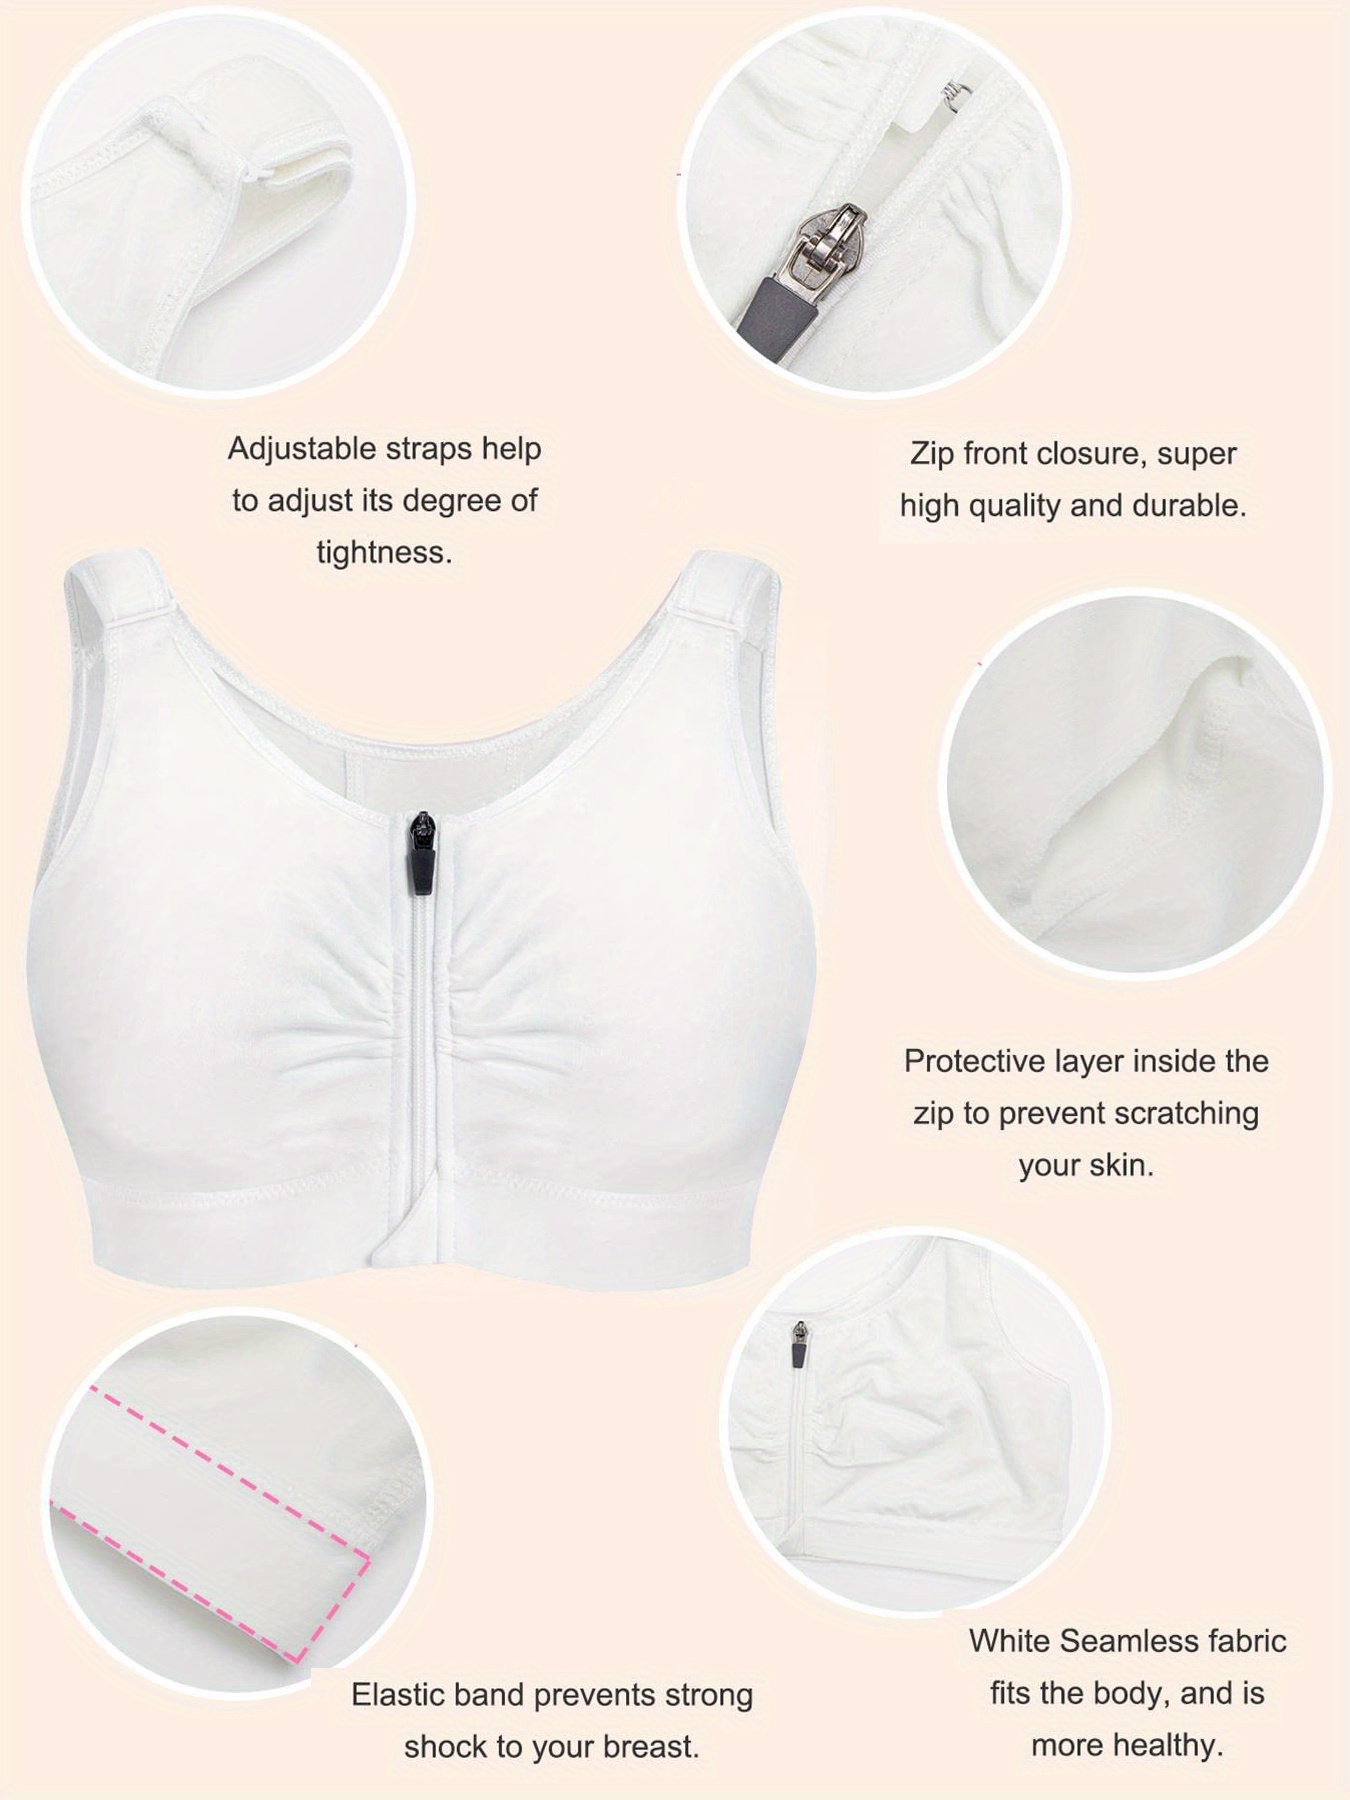 Post Surgical Bra with Front Closure Wireless Comfy Post Surgery